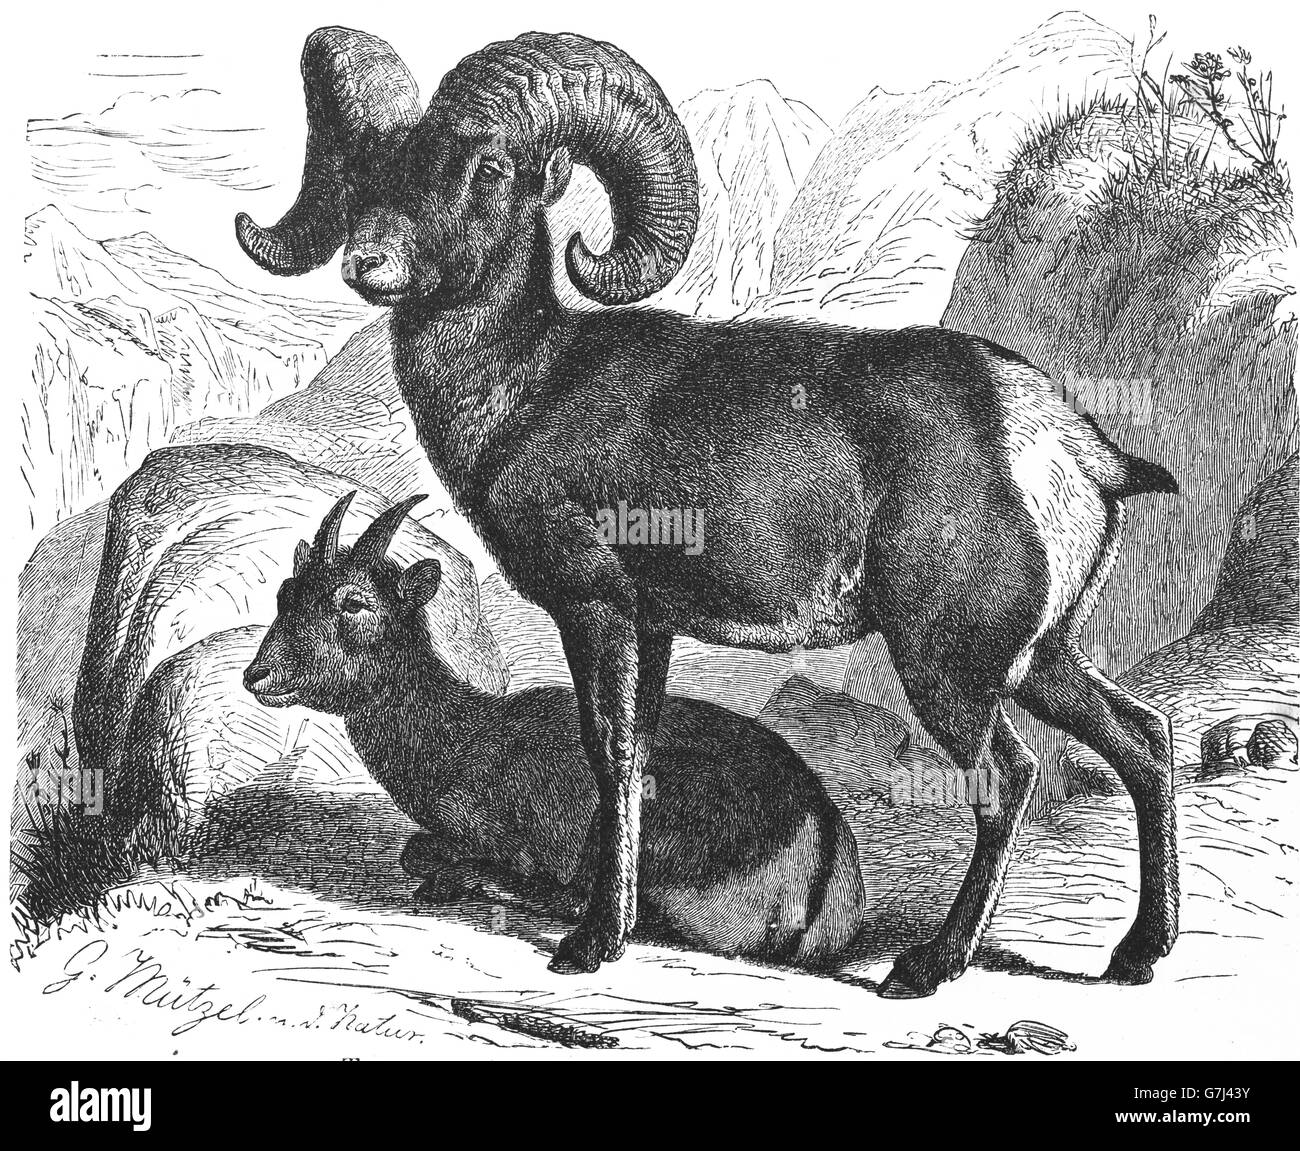 Bighorn sheep, Ovis canadensis, illustration from book dated 1904 Stock Photo